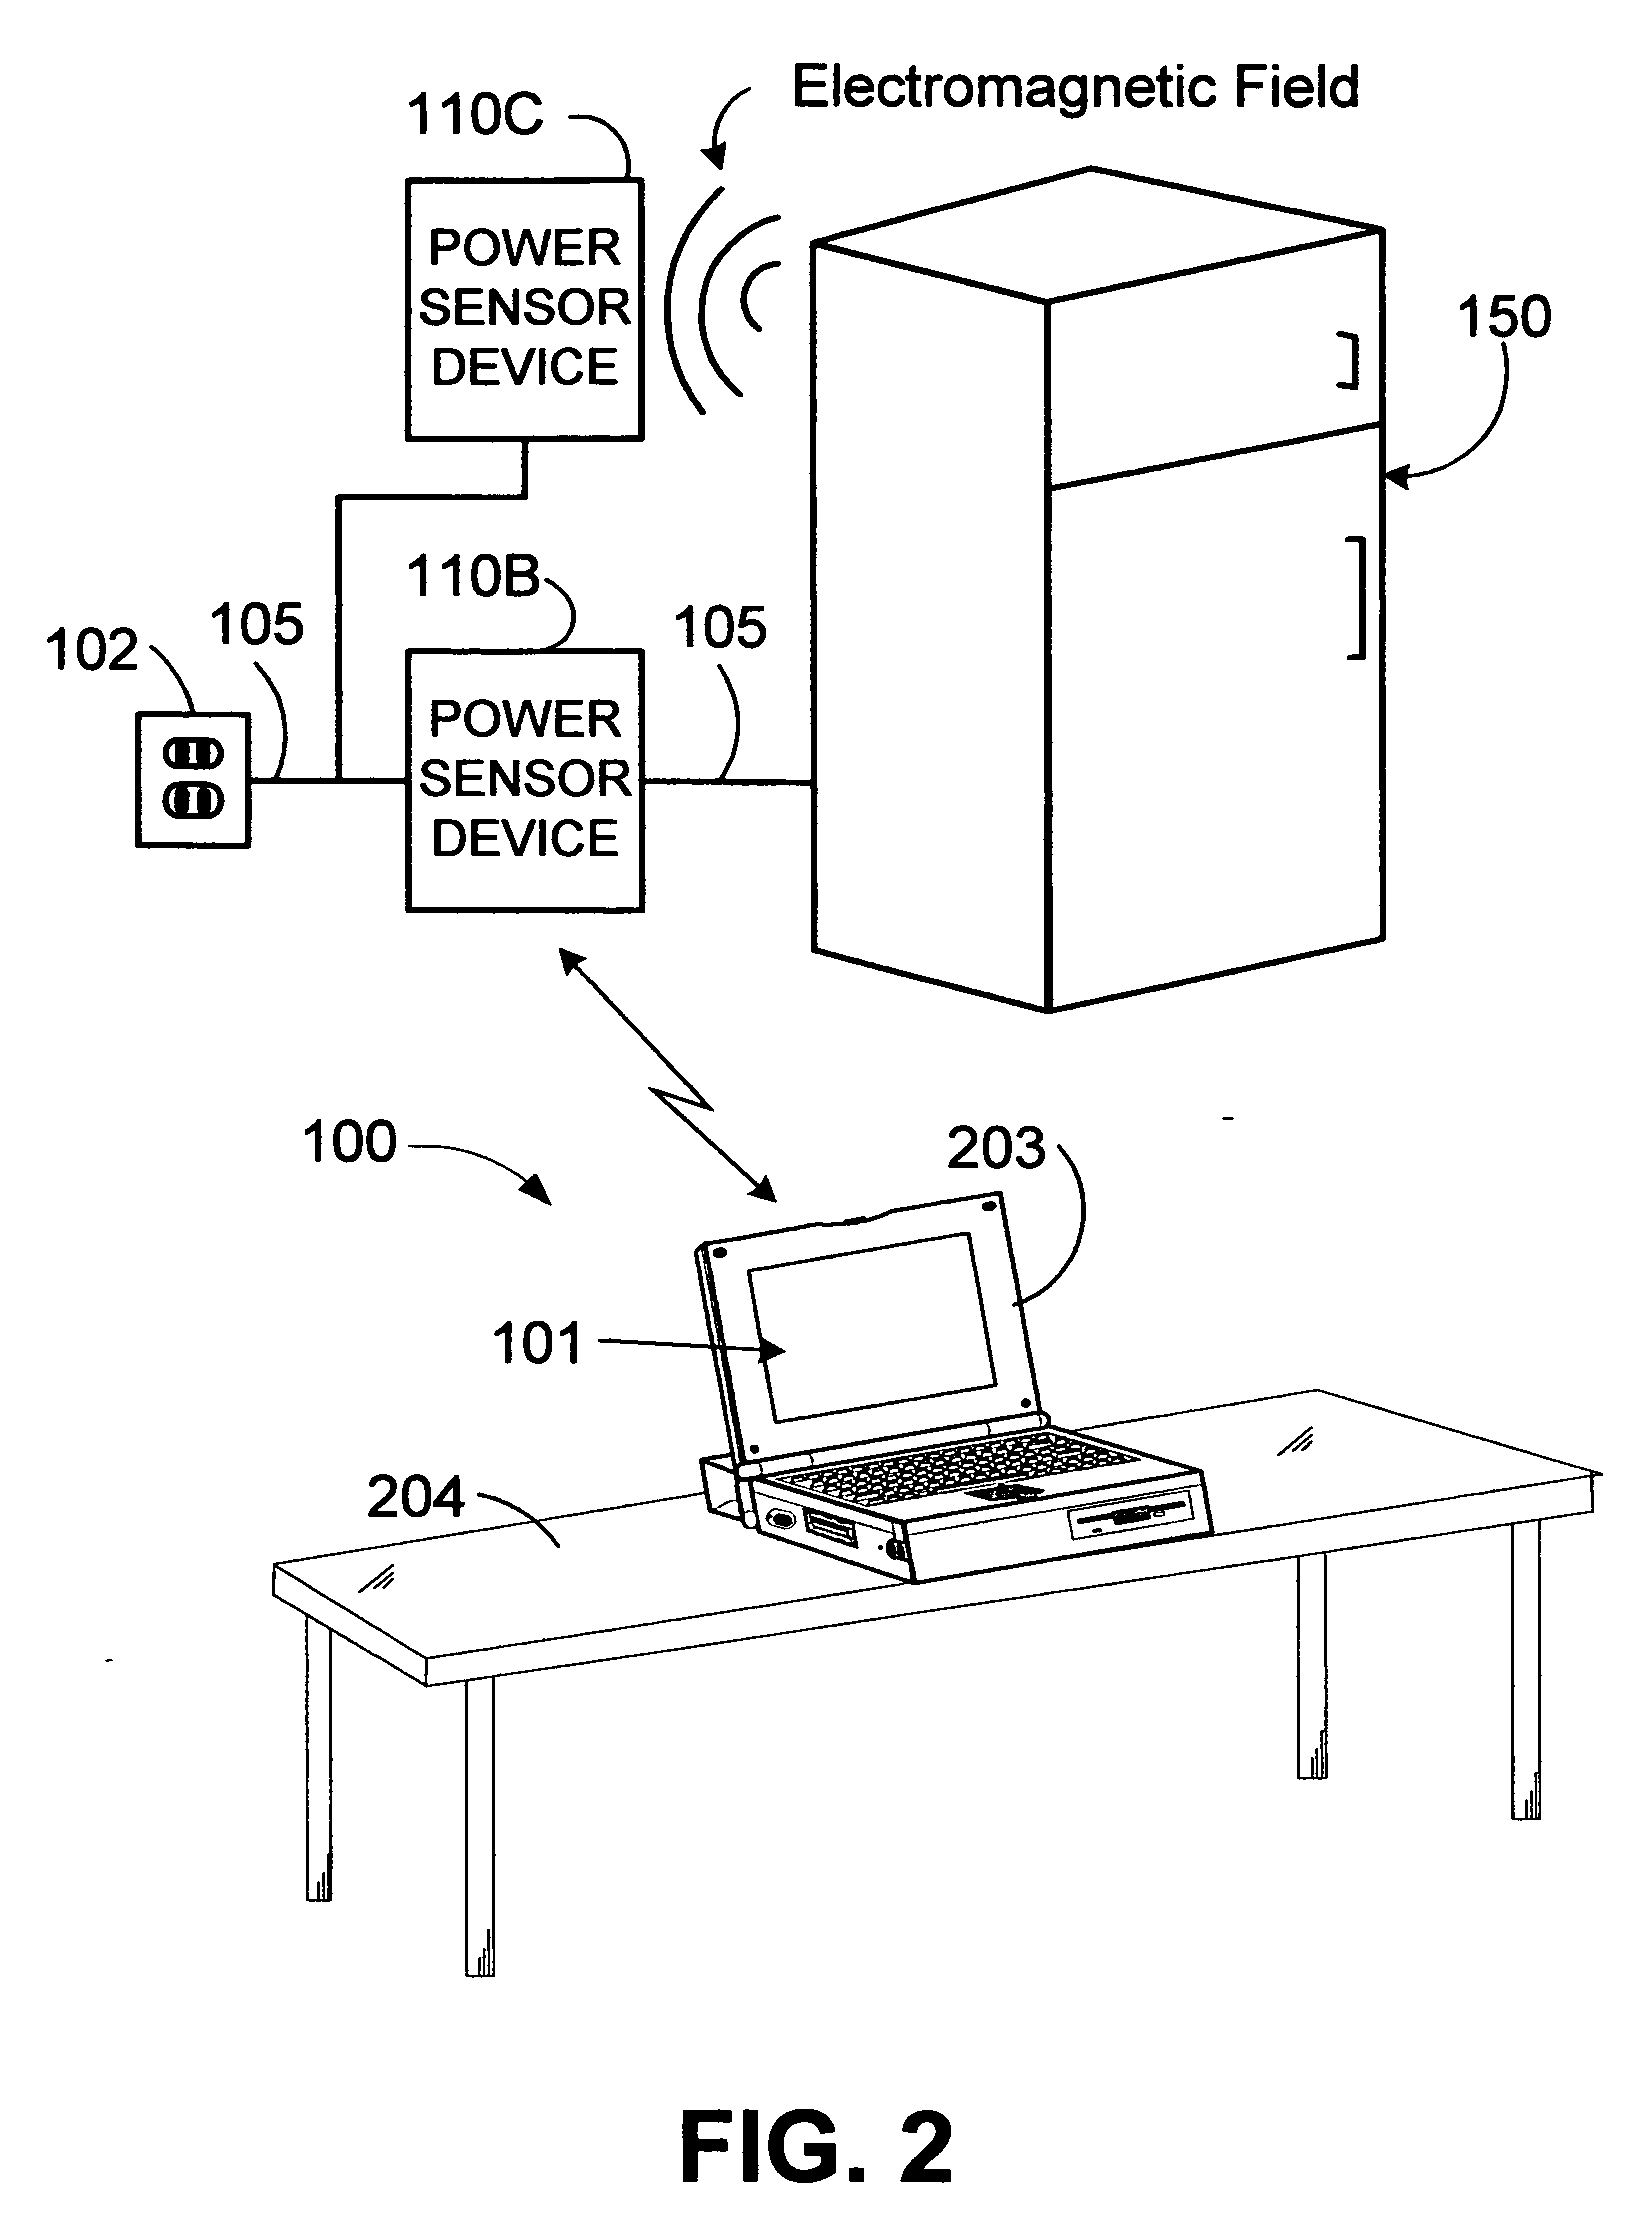 Apparatus and method for monitoring and displaying power usage